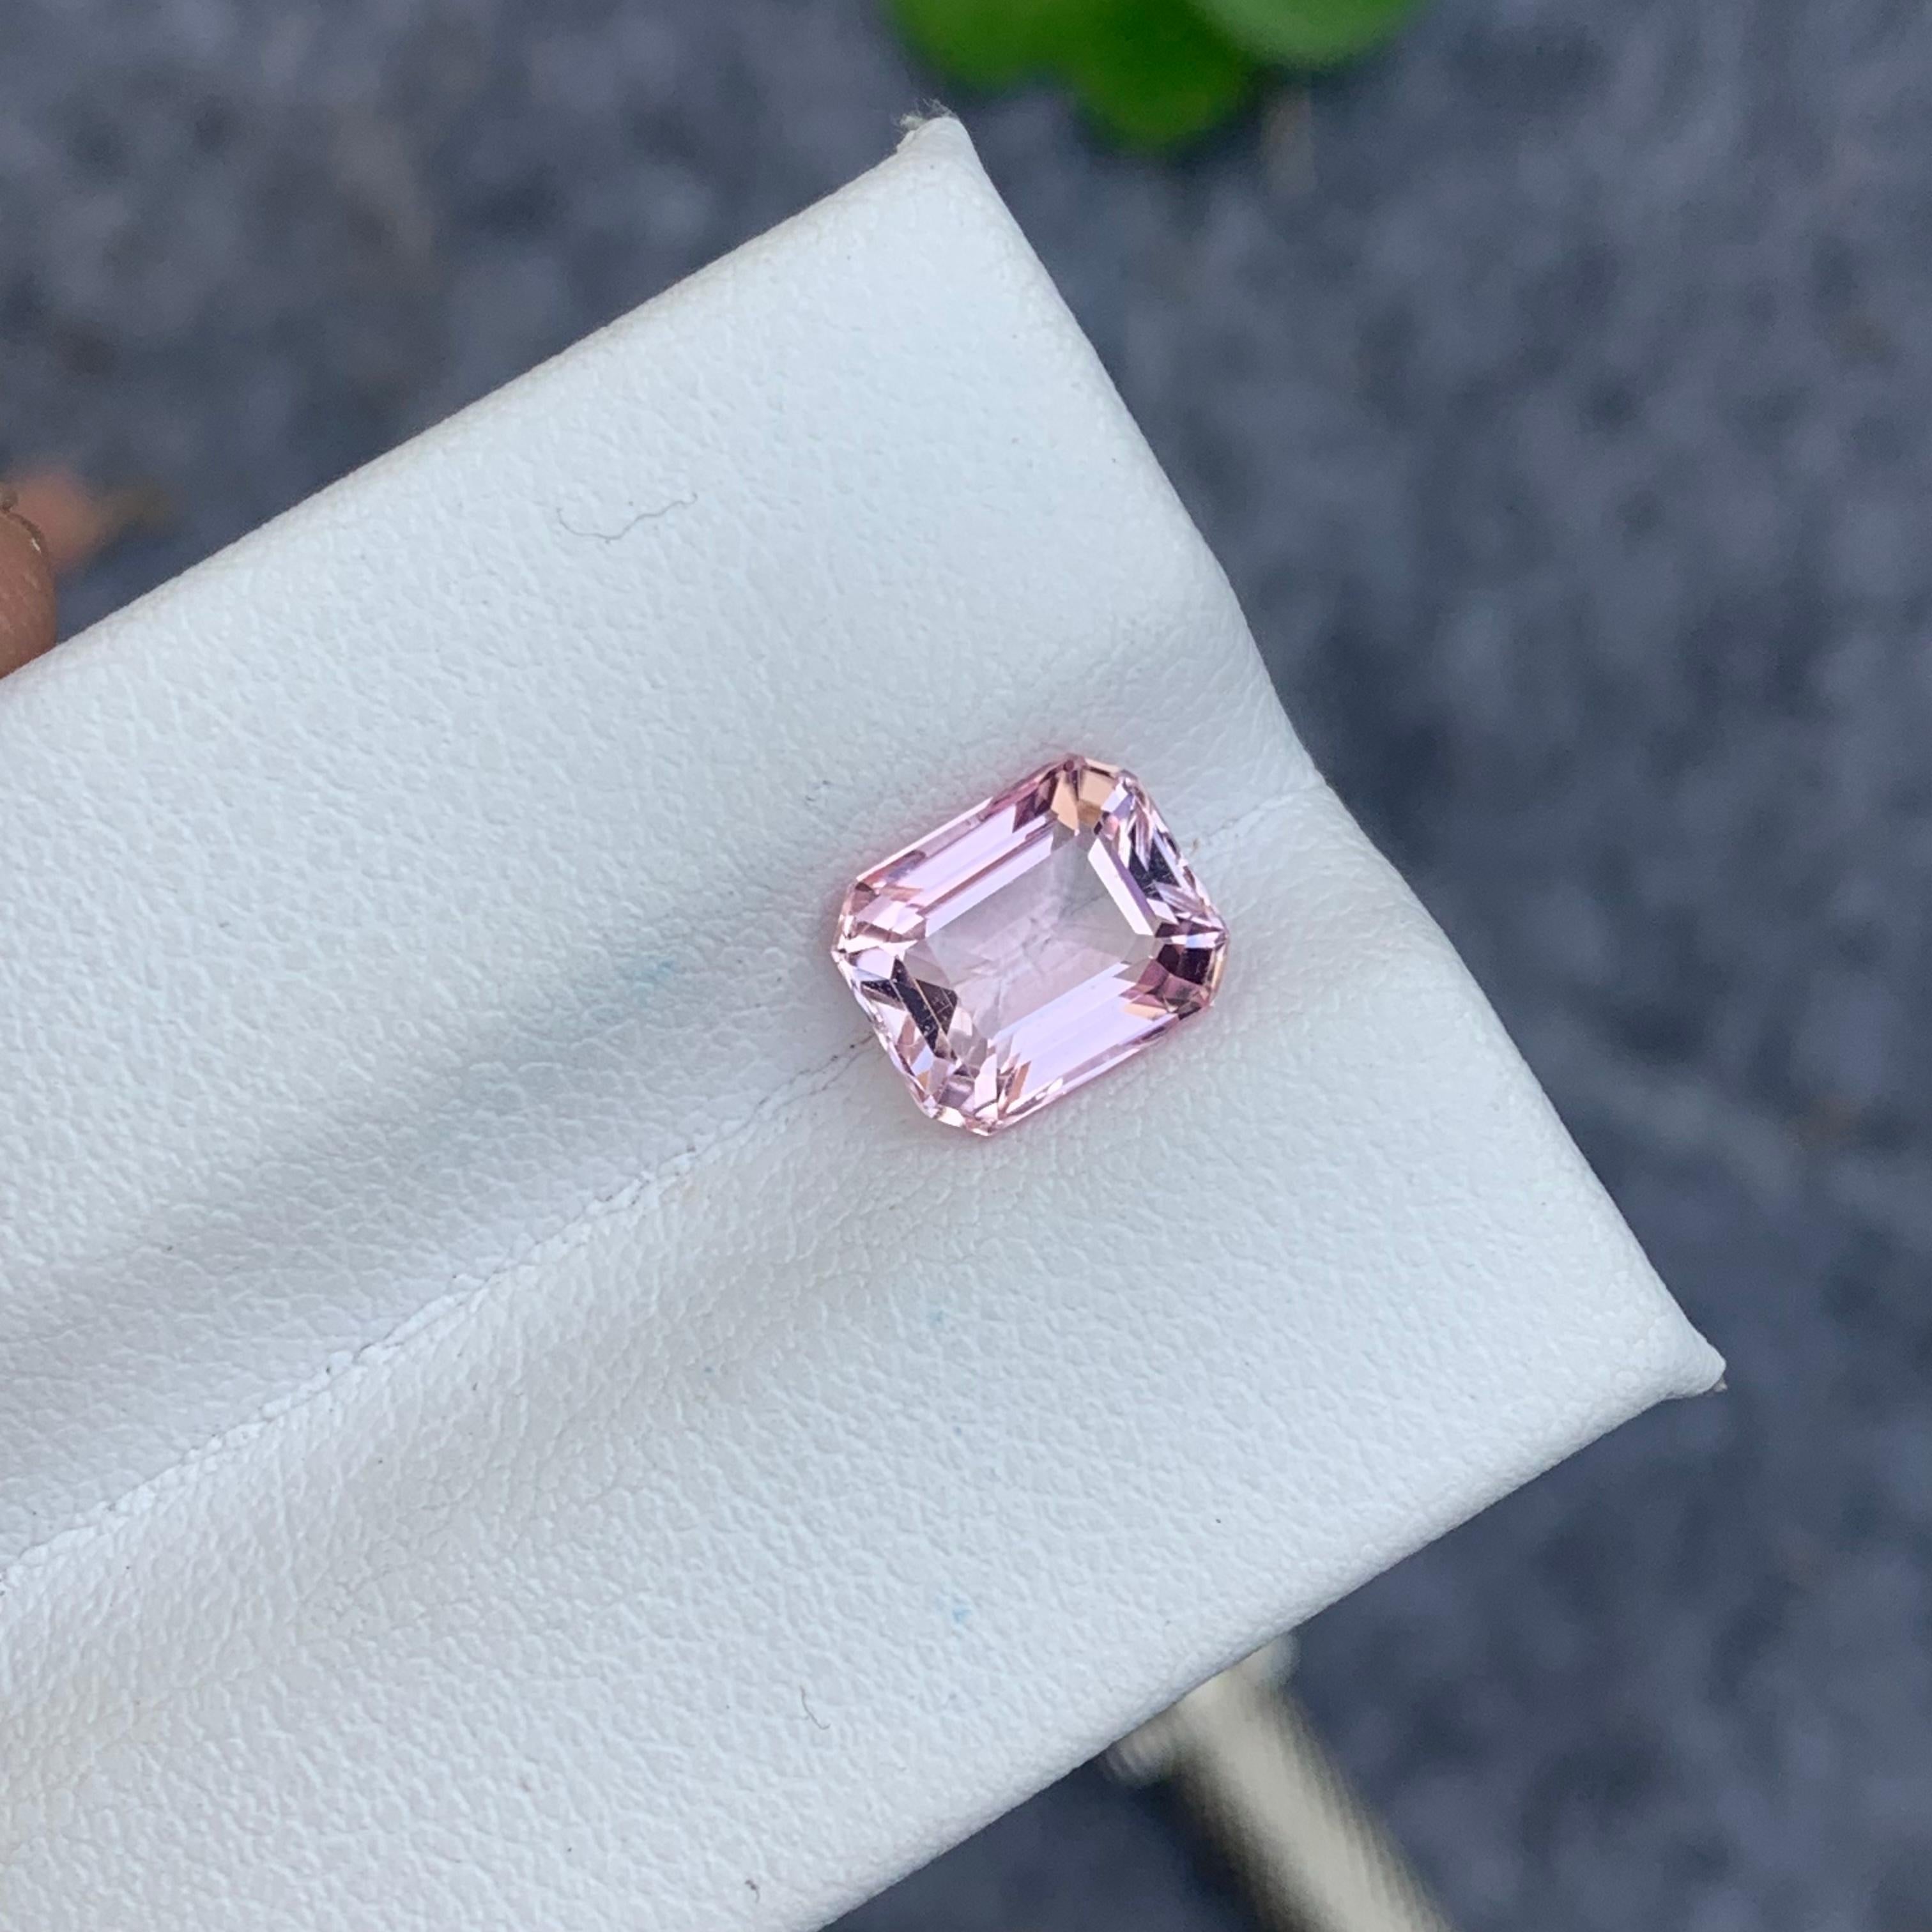 Gemstone Type : Tourmaline
Weight : 2.15 Carats
Dimensions : 8.1x6.7x4.9 Mm
Origin : Kunar Afghanistan
Clarity : Eye Clean
Shape: Emerald 
Color: Pink
Certificate: On Demand
Basically, mint tourmalines are tourmalines with pastel hues of light green